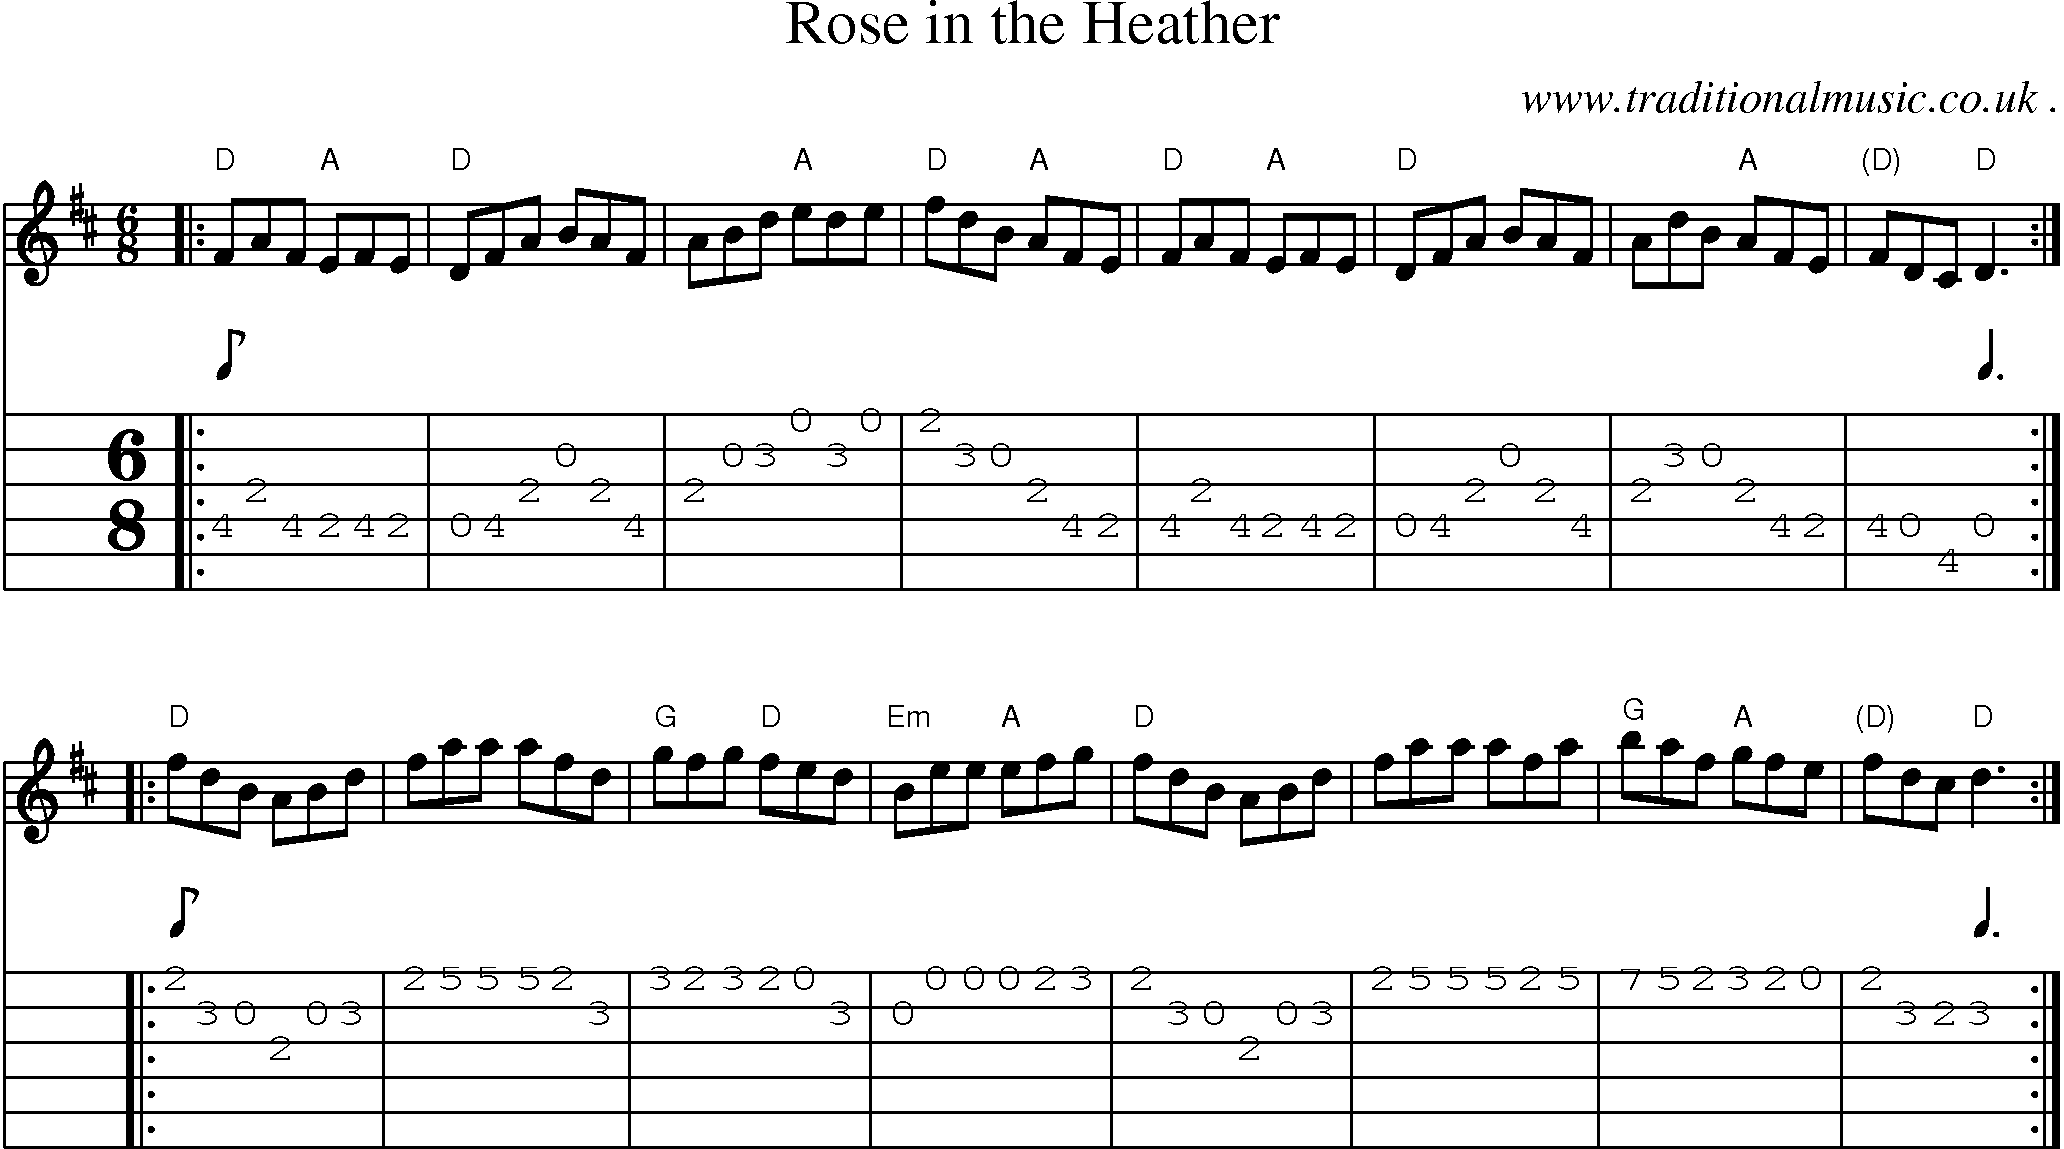 Sheet-music  score, Chords and Guitar Tabs for Rose In The Heather